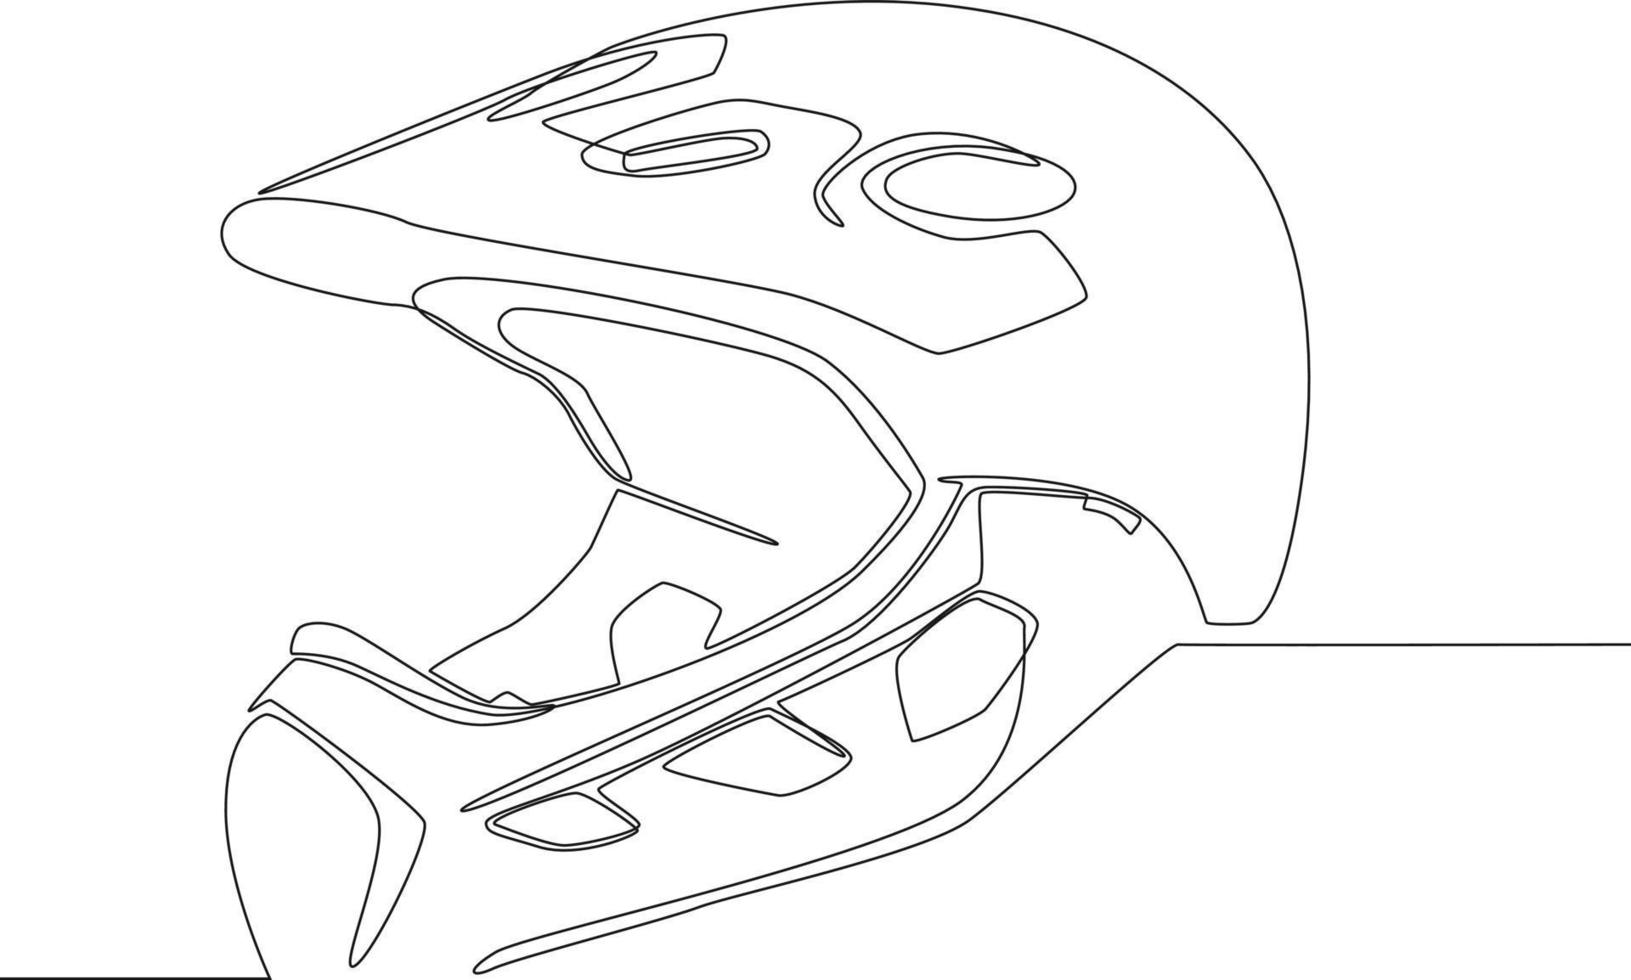 Simple continuous line drawing Motorcycle helmet. Vector illustration.